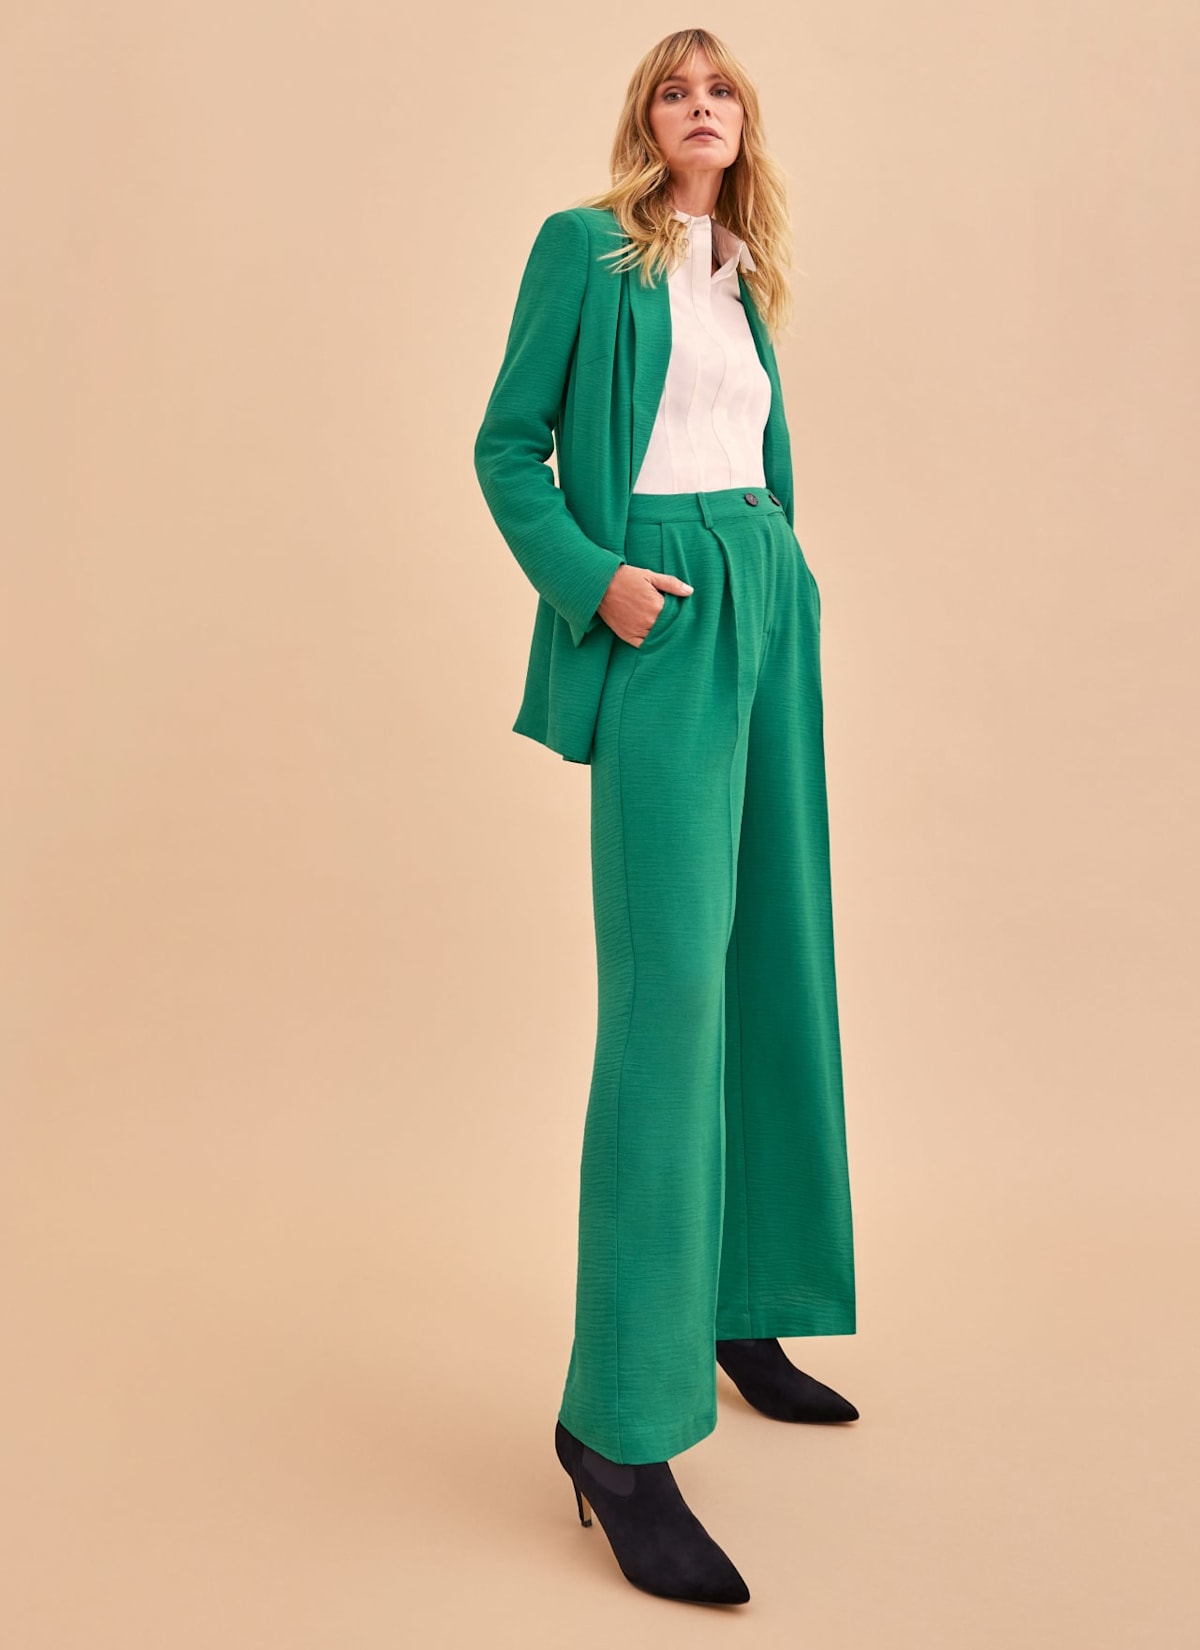 Woman wearing green suit co-ord and black boots